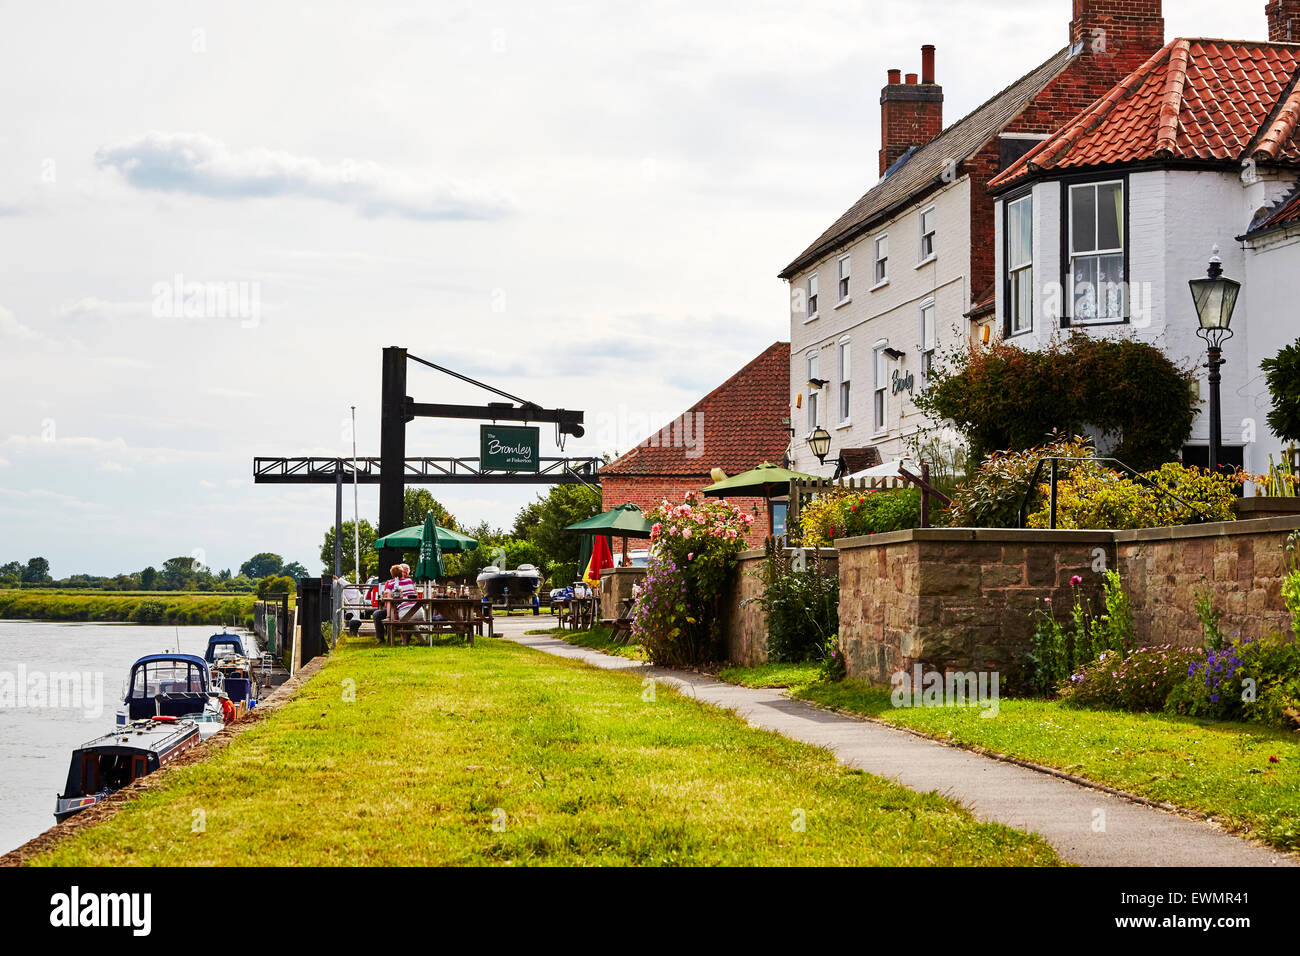 View of the River Trent and Bromley pub at Fiskerton, Nottinghamshire, England, UK. Stock Photo